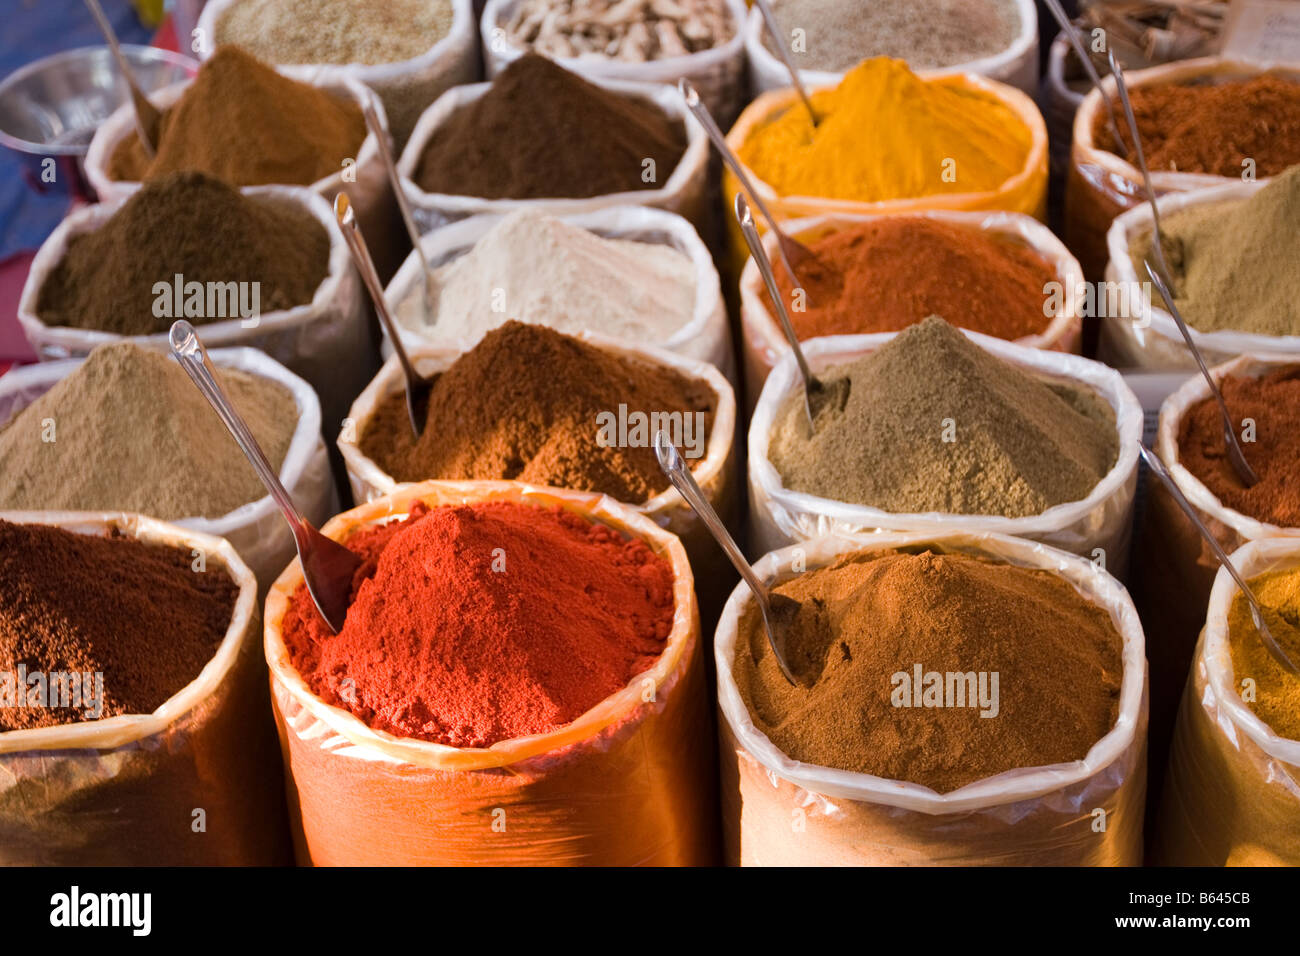 Spices used in cooking authentic Asian food on sale at a market in India Stock Photo